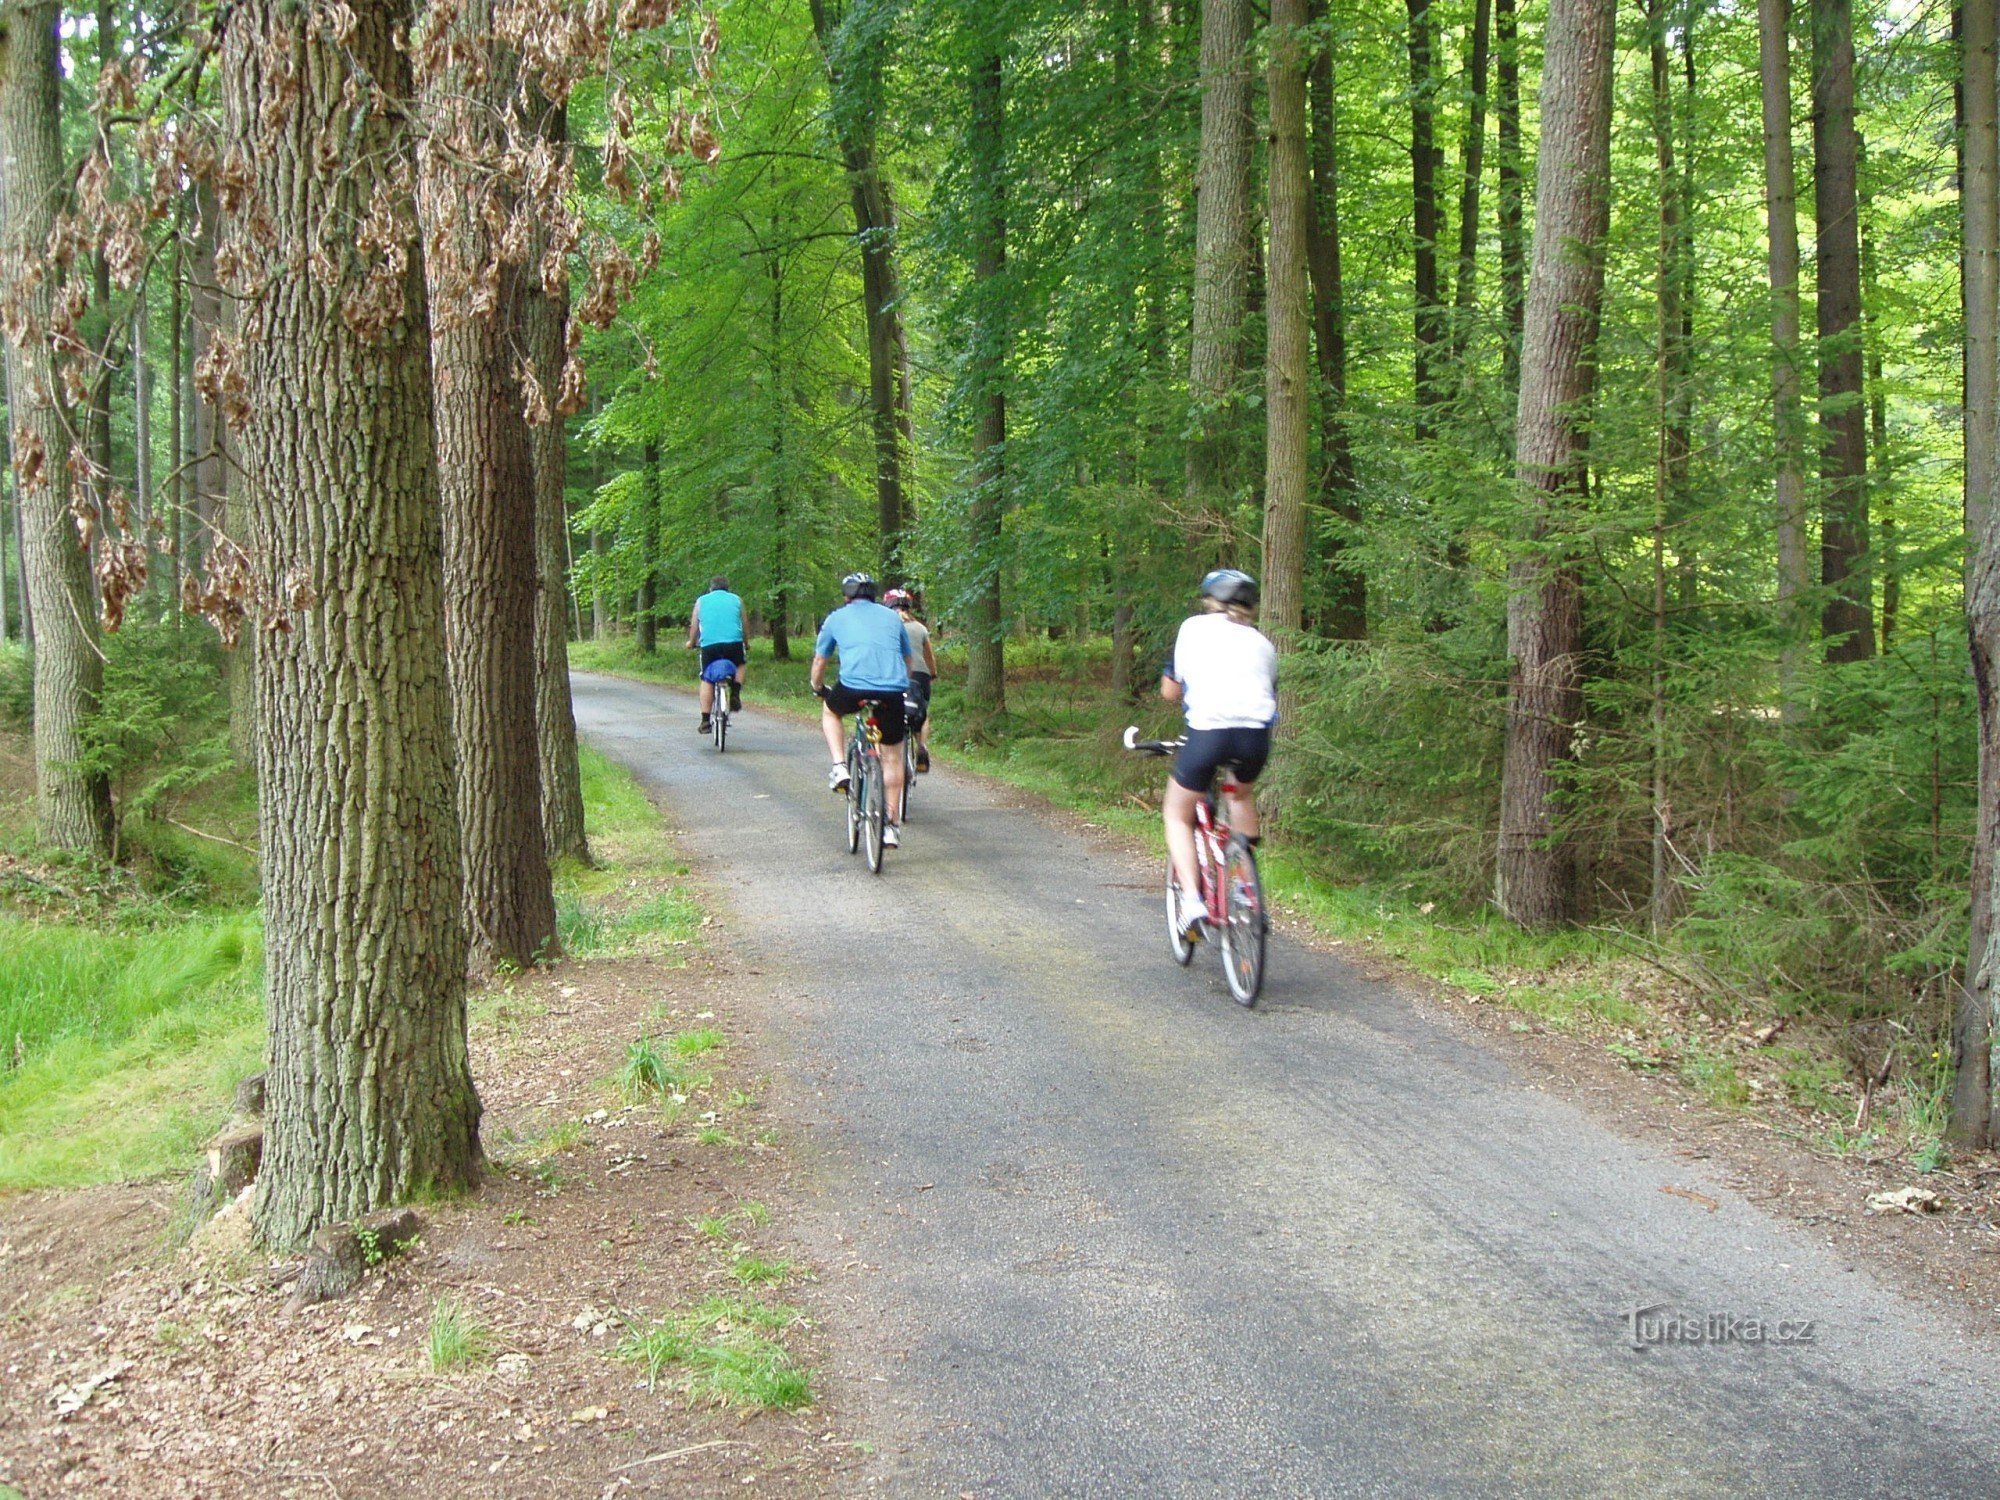 Paved forest roads are ideal for cycling in the Třeboň region